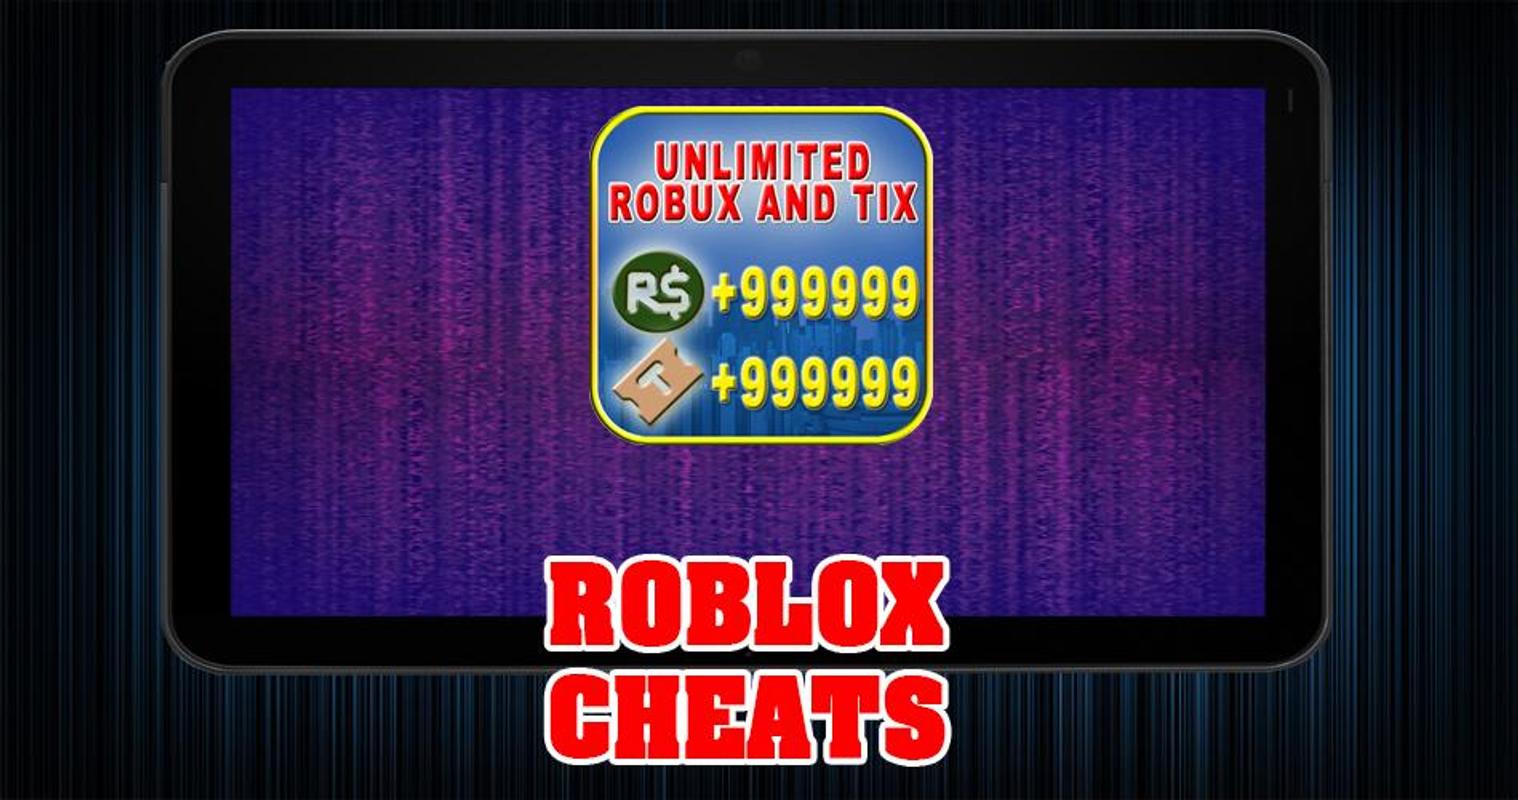 Cheats For Roblox No Root Prank For Android Apk Download - cheats for roblox no root prank screenshot 5